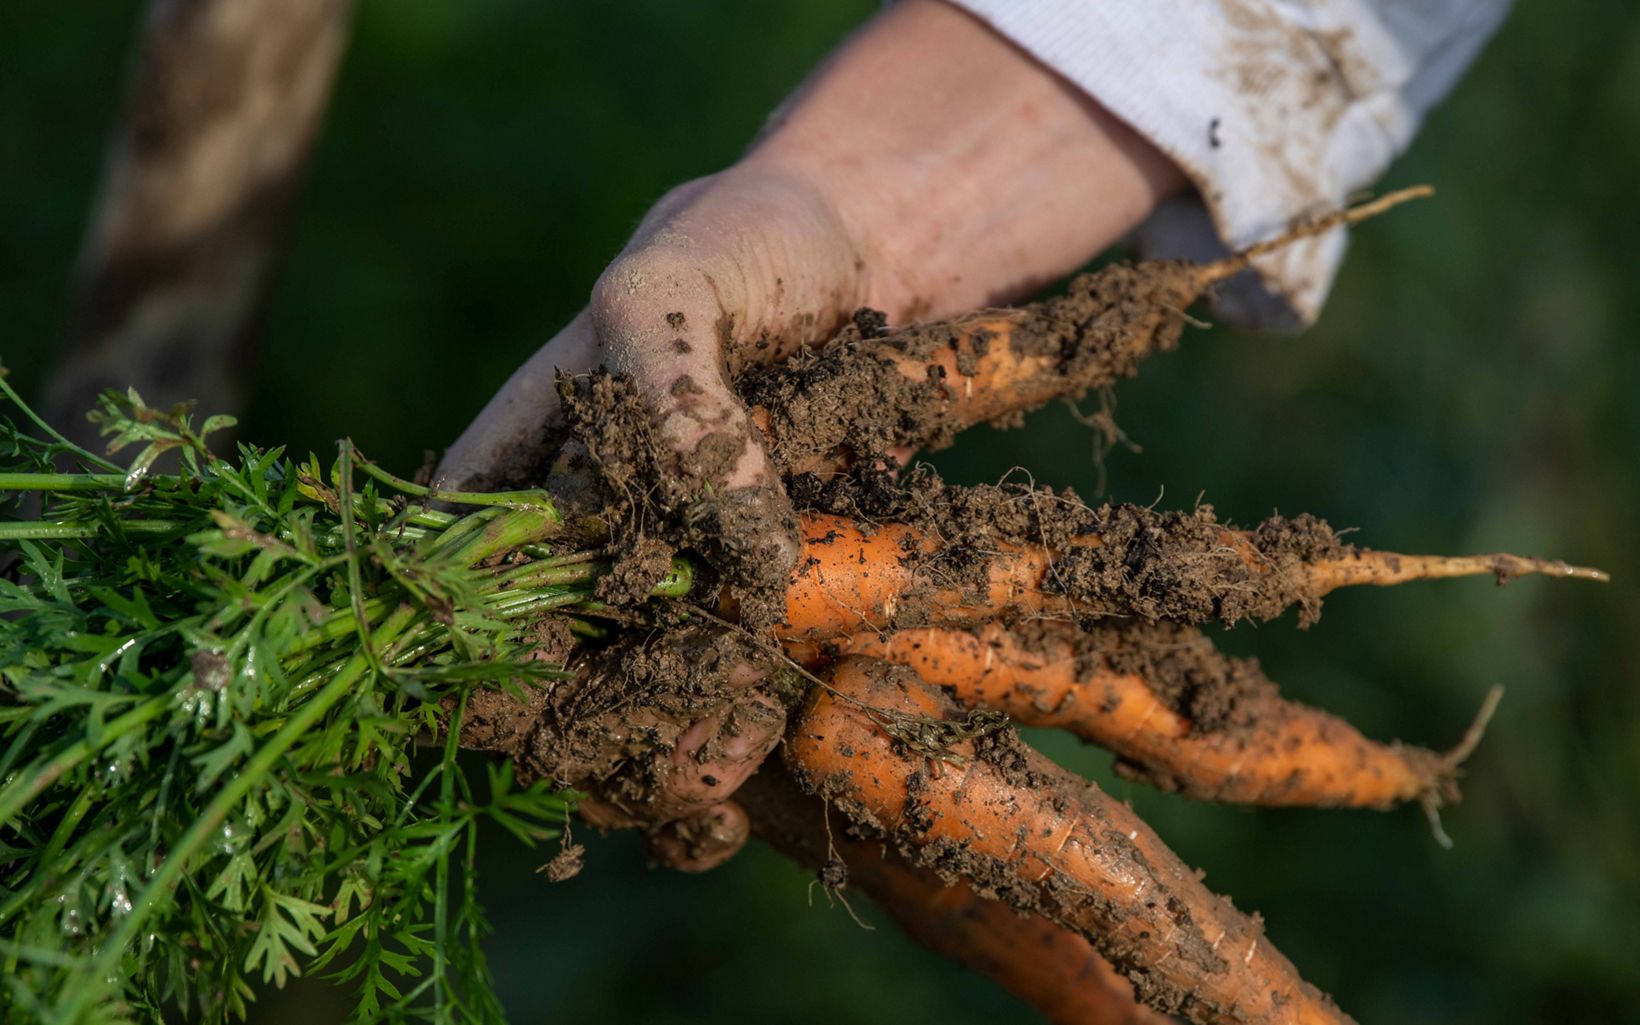 A closeup image of a hand holding a bunch of carrots. there is dirt covering the carrots and the sleeve of the person's hand.